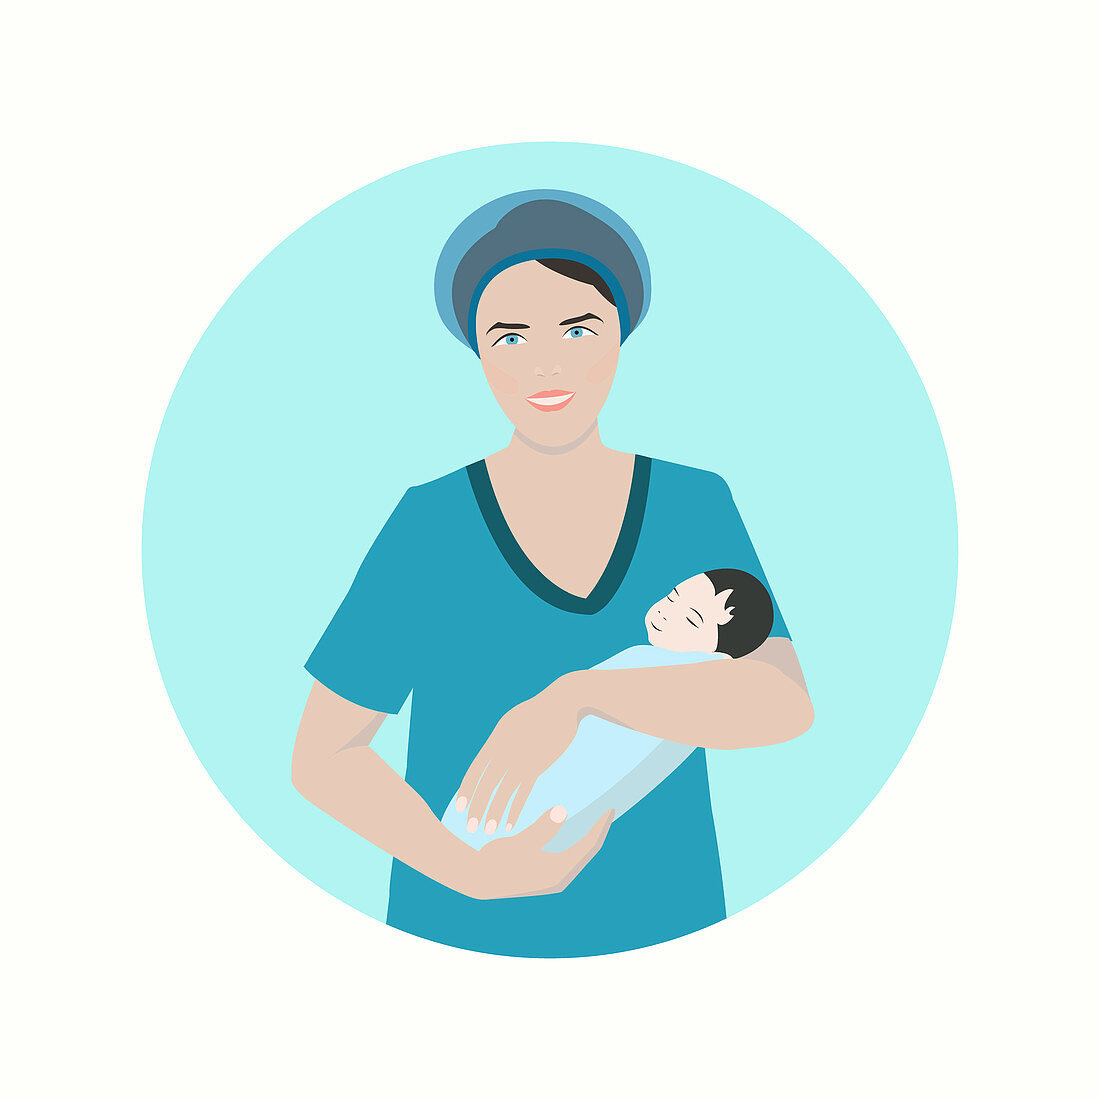 Midwife with a newborn baby, illustration